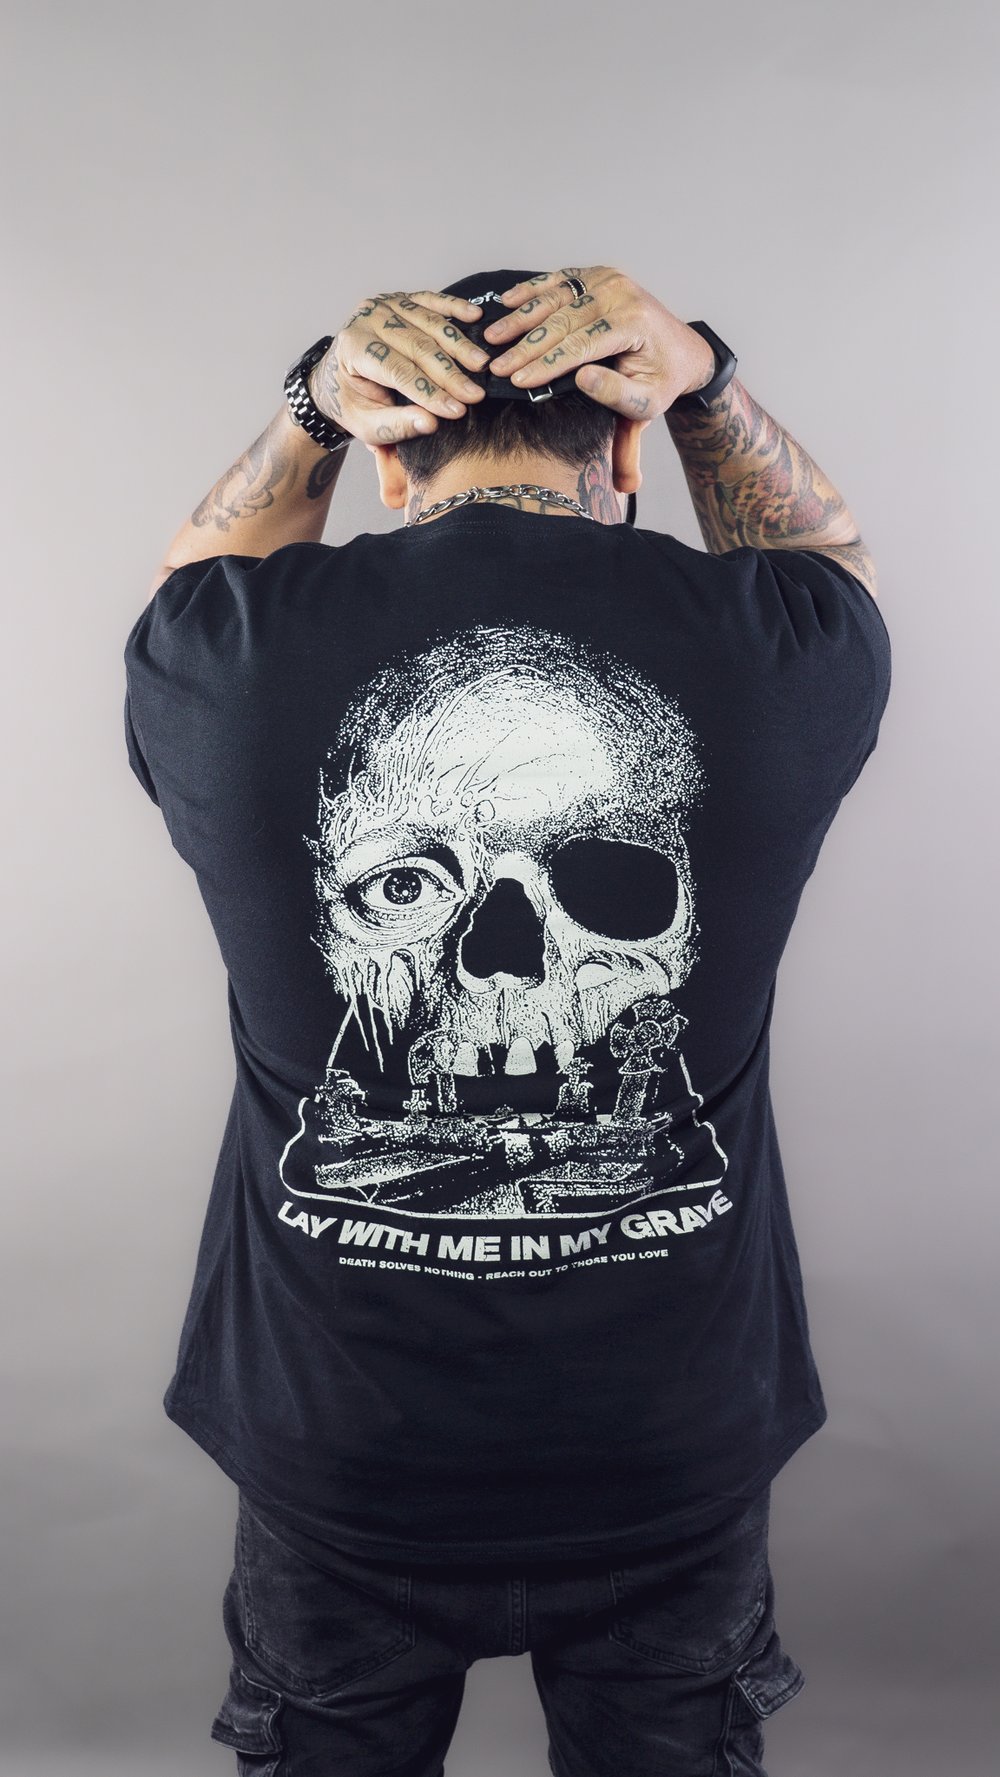 LAY WITH ME IN MY GRAVE CHARITY SHIRT | PALEFACE SWISS GMBH ...